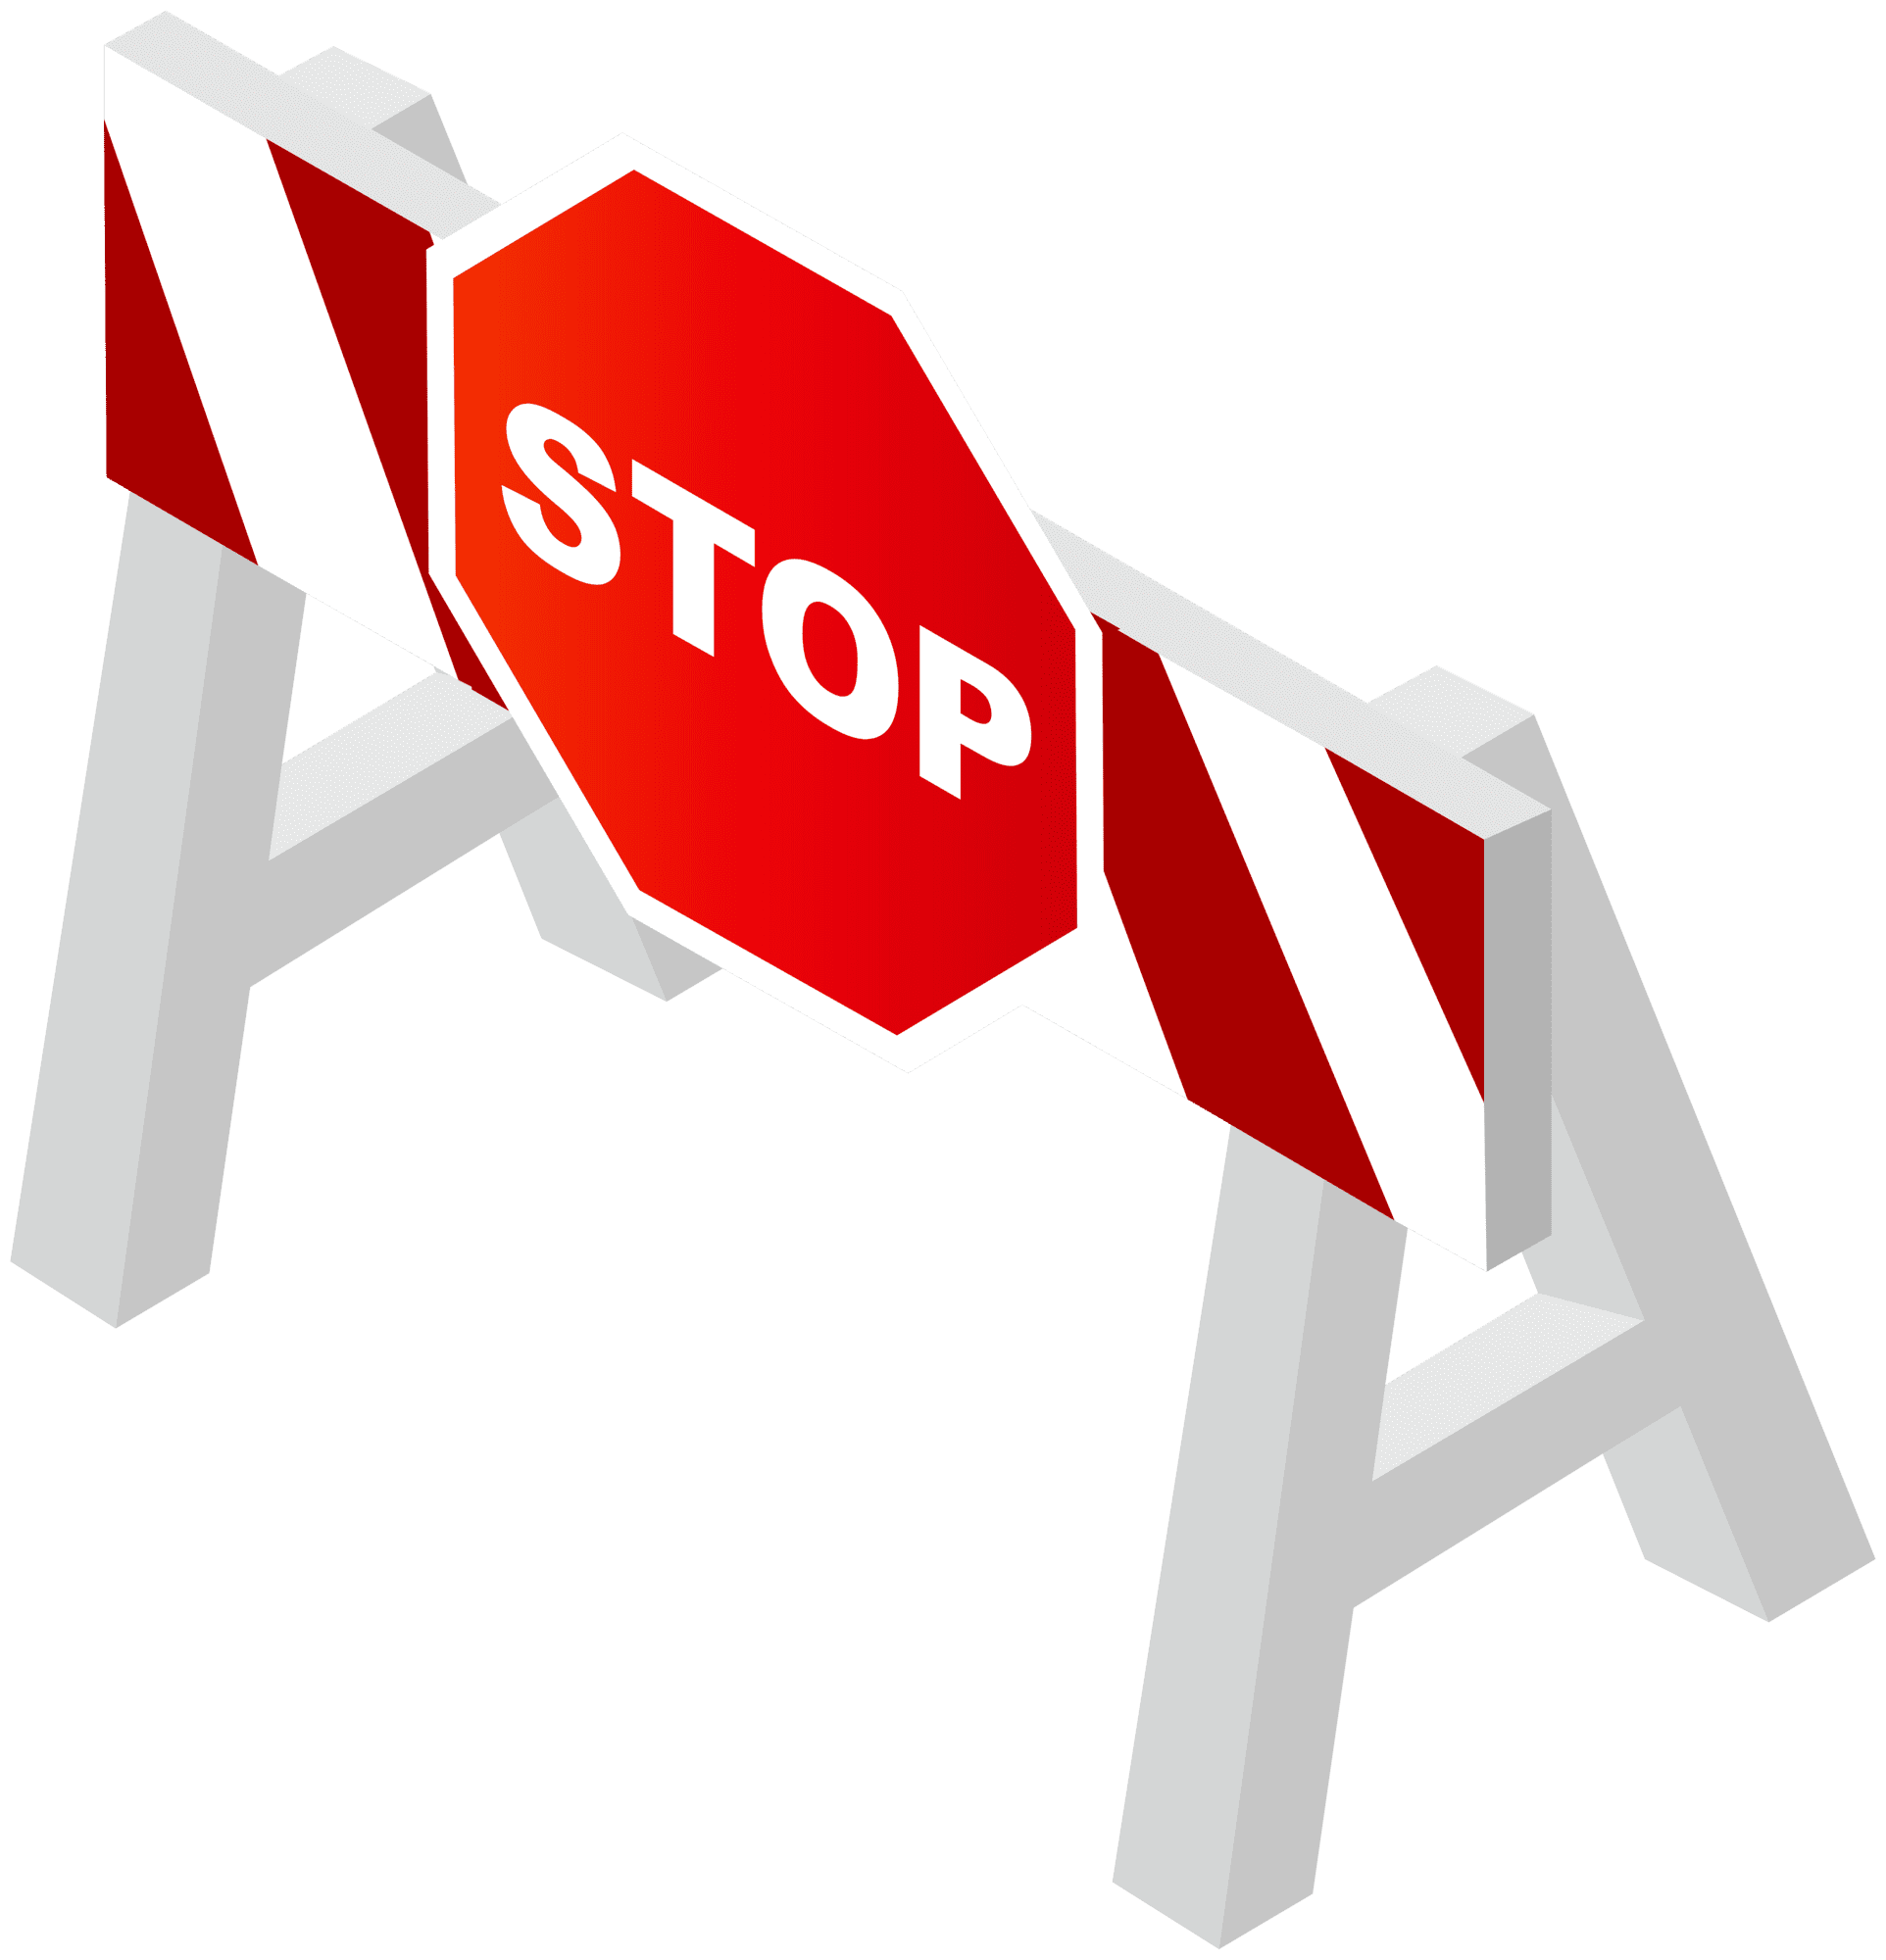 Stop signal road barricade clipart best free